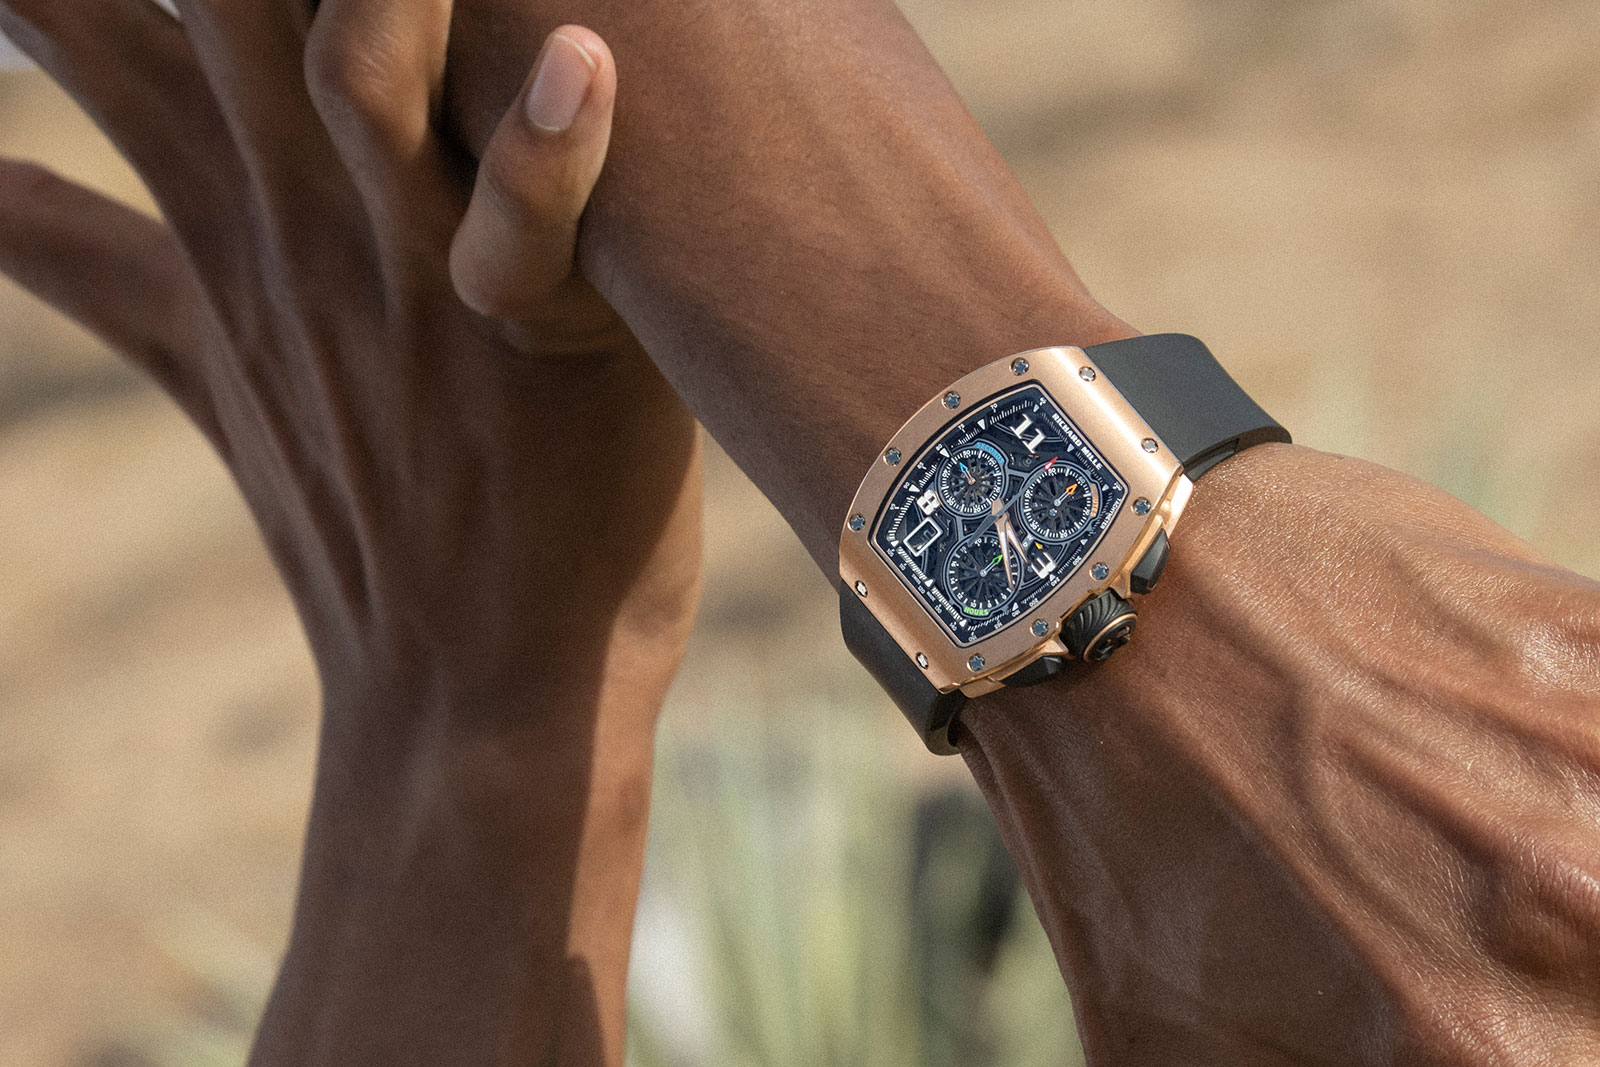 Richard Mille Takes A Leap Into The Future With The New RM 72-01 Lifestyle In-House Chronograph